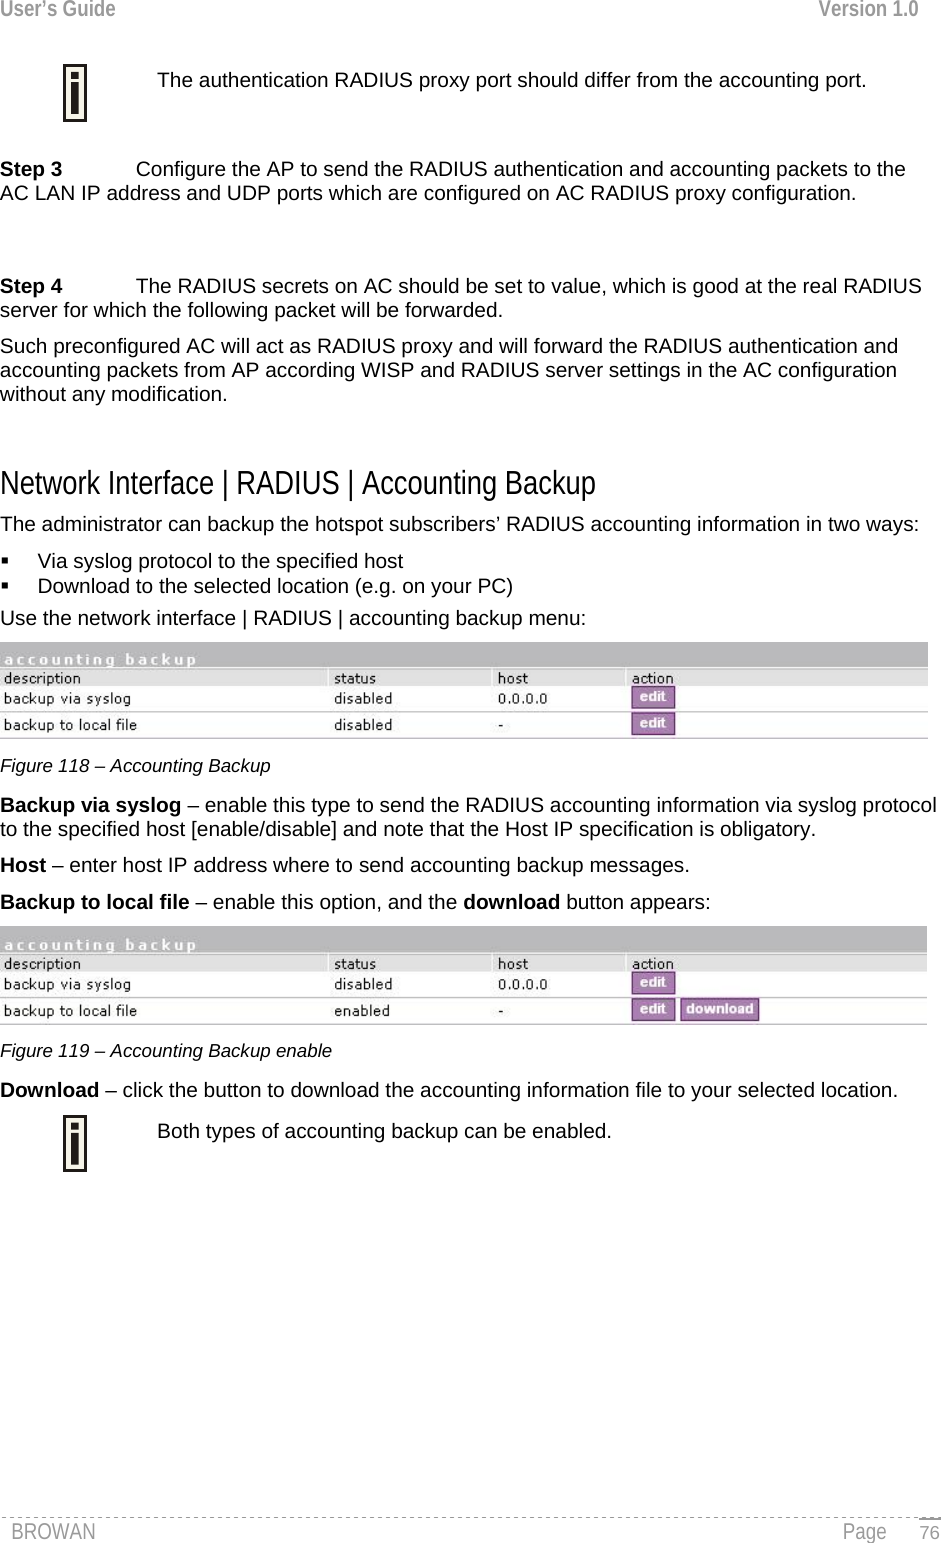 User’s Guide  Version 1.0   The authentication RADIUS proxy port should differ from the accounting port.  Step 3  Configure the AP to send the RADIUS authentication and accounting packets to the AC LAN IP address and UDP ports which are configured on AC RADIUS proxy configuration.    Step 4  The RADIUS secrets on AC should be set to value, which is good at the real RADIUS server for which the following packet will be forwarded. Such preconfigured AC will act as RADIUS proxy and will forward the RADIUS authentication and accounting packets from AP according WISP and RADIUS server settings in the AC configuration without any modification.  Network Interface | RADIUS | Accounting Backup The administrator can backup the hotspot subscribers’ RADIUS accounting information in two ways:   Via syslog protocol to the specified host   Download to the selected location (e.g. on your PC) Use the network interface | RADIUS | accounting backup menu:  Figure 118 – Accounting Backup Backup via syslog – enable this type to send the RADIUS accounting information via syslog protocol to the specified host [enable/disable] and note that the Host IP specification is obligatory. Host – enter host IP address where to send accounting backup messages. Backup to local file – enable this option, and the download button appears:  Figure 119 – Accounting Backup enable Download – click the button to download the accounting information file to your selected location. Both types of accounting backup can be enabled.   BROWAN                                                                                                                                               Page   76